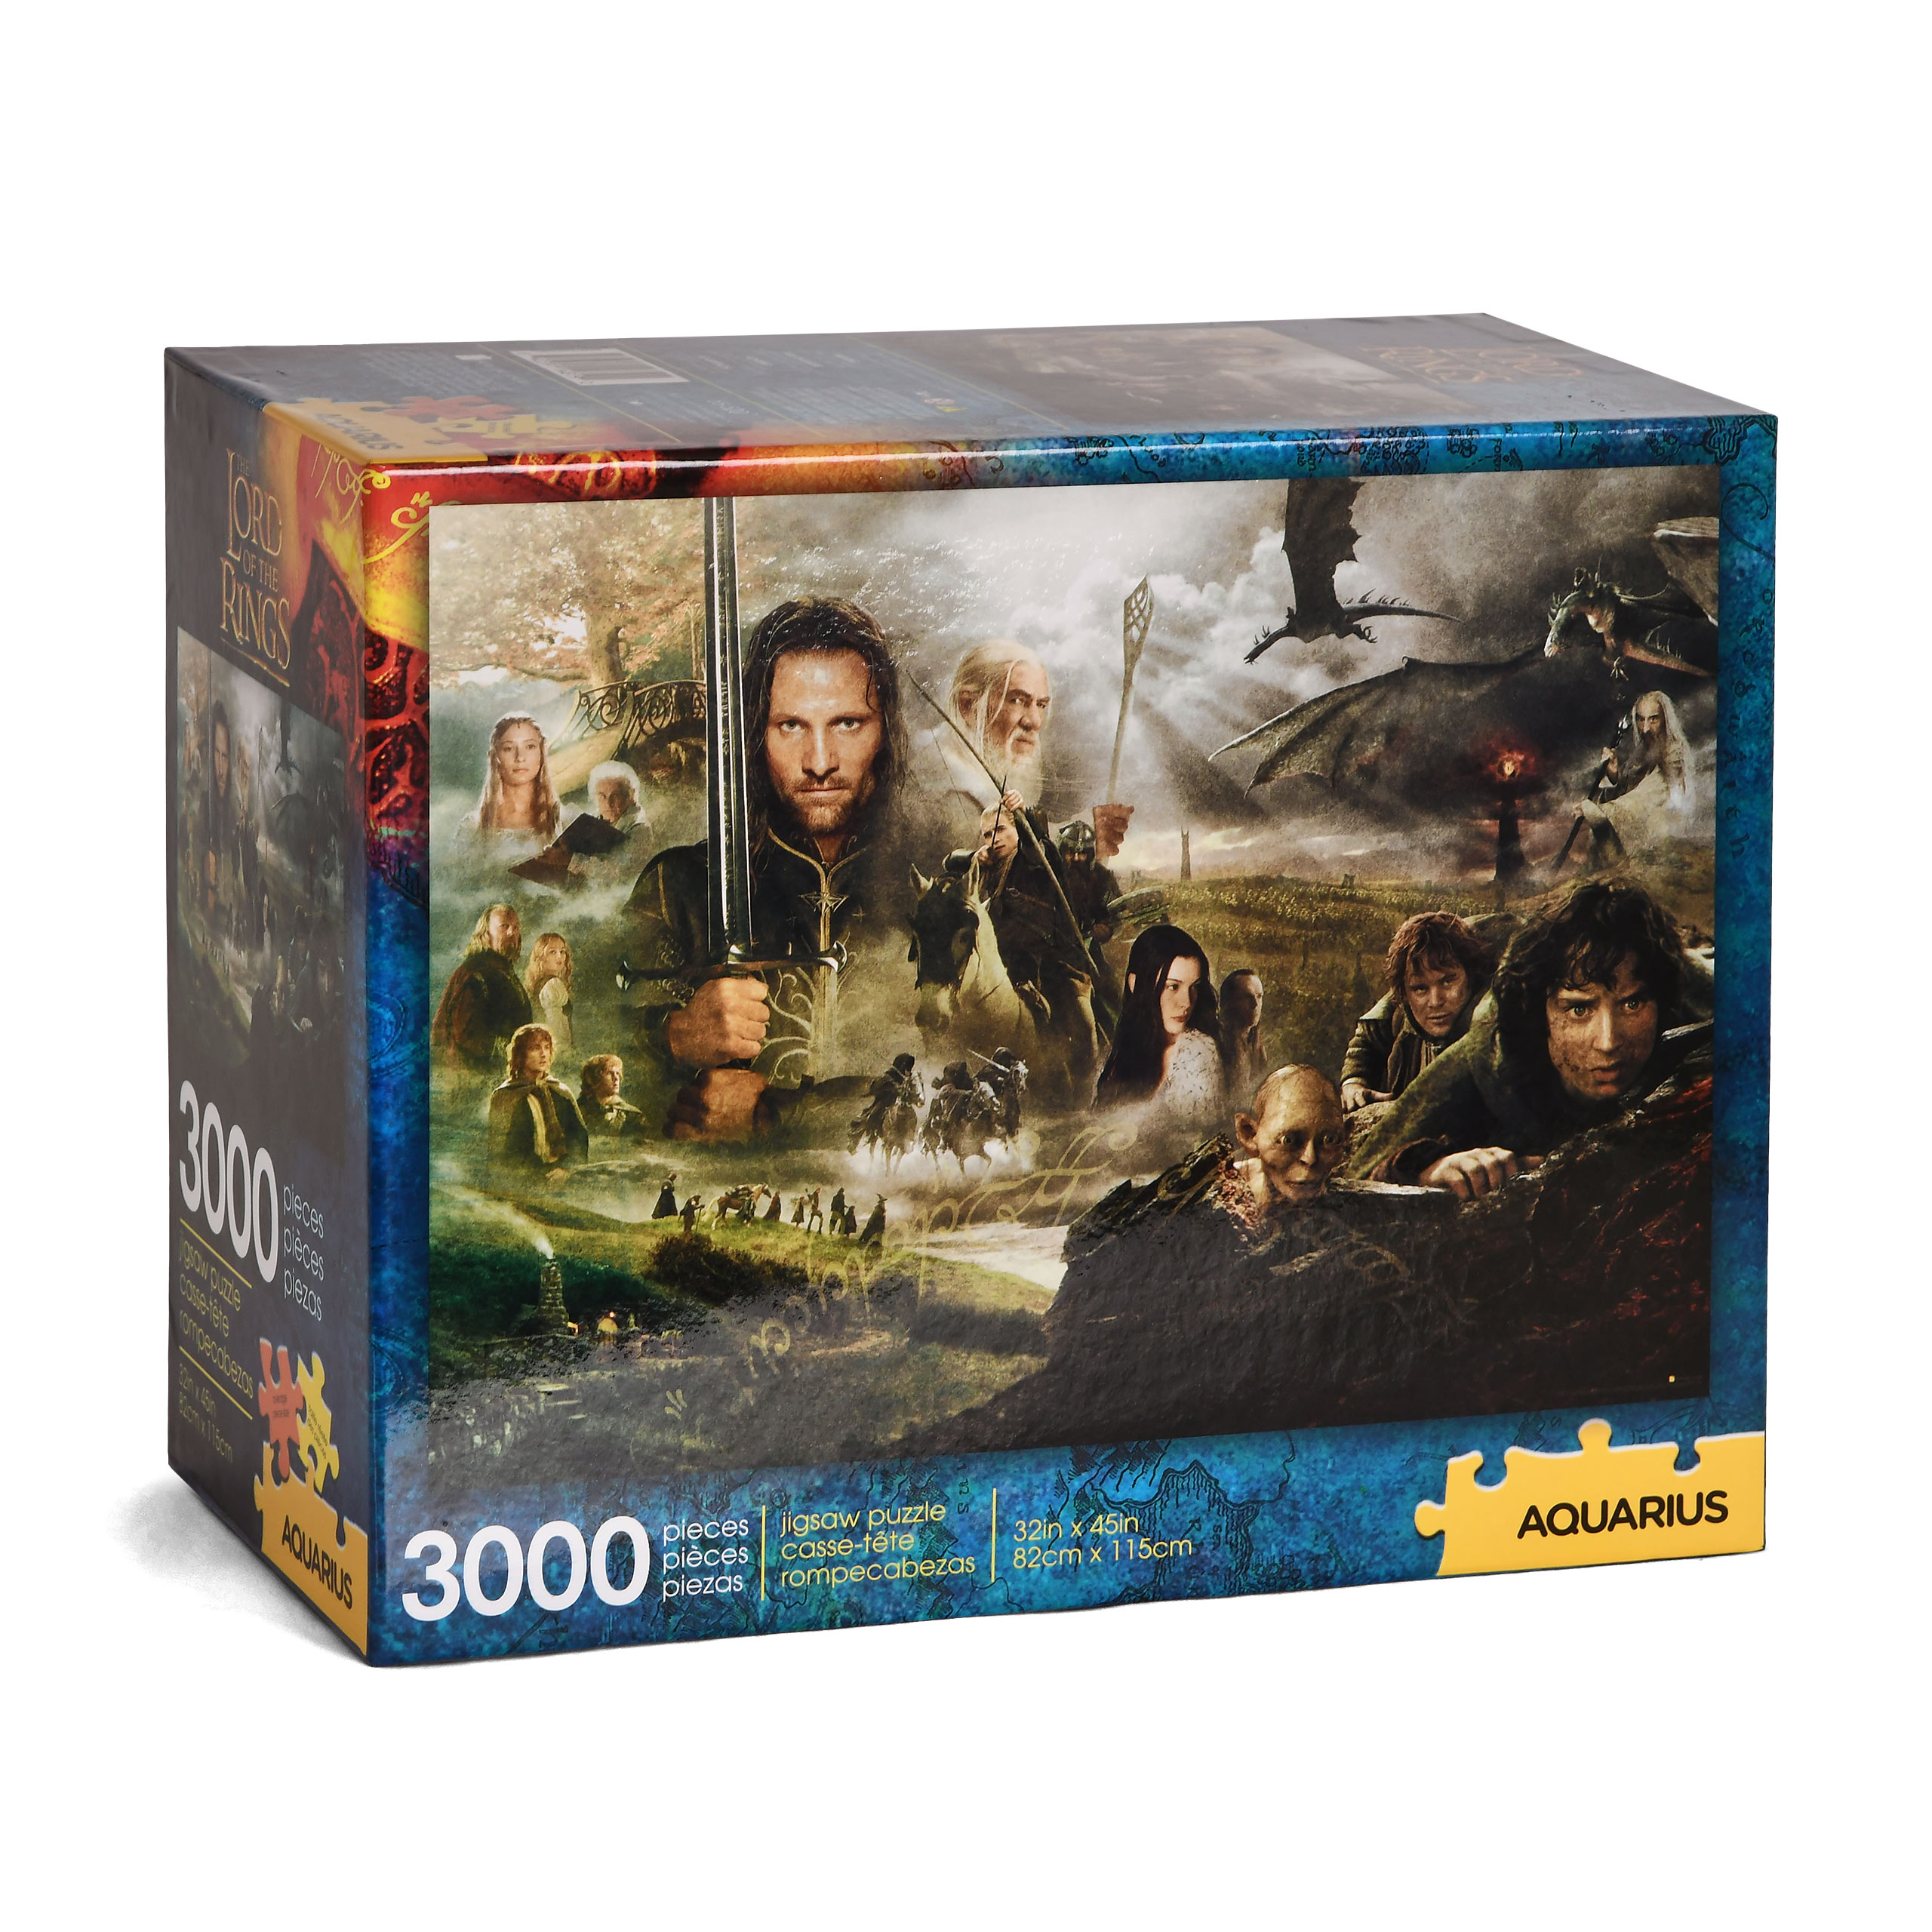 Lord of the Rings - Saga Puzzle 3000 Pieces